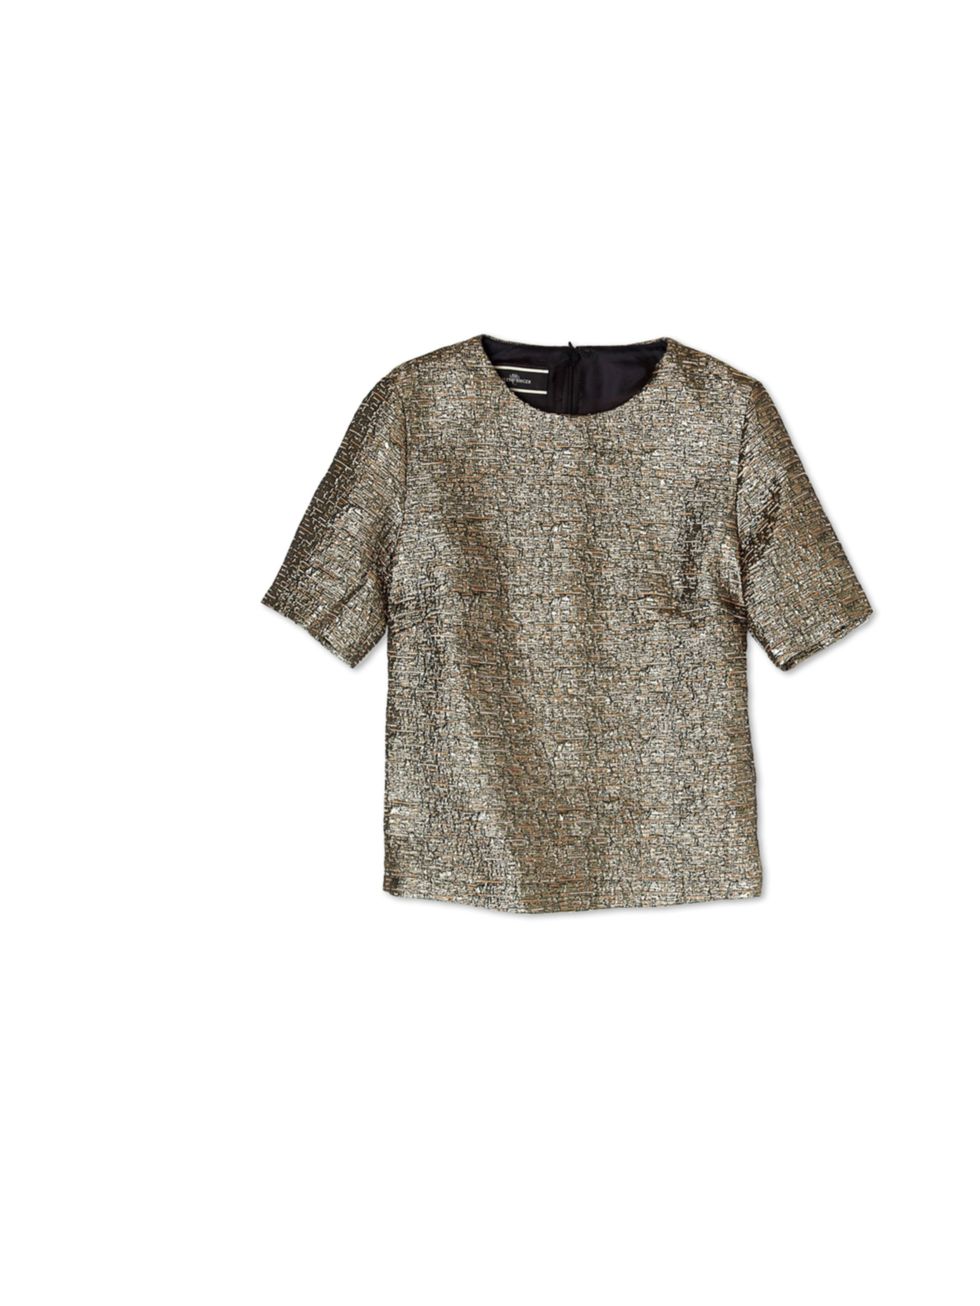 <p>Get in the Olympic spirit with By Malene Birgers gold lame top... By Malane Birger metallic top, £179, at My-Wardrobe</p><p><a href="http://shopping.elleuk.com/browse?fts=by+malene+birger+gold+lame">BUY NOW</a></p>